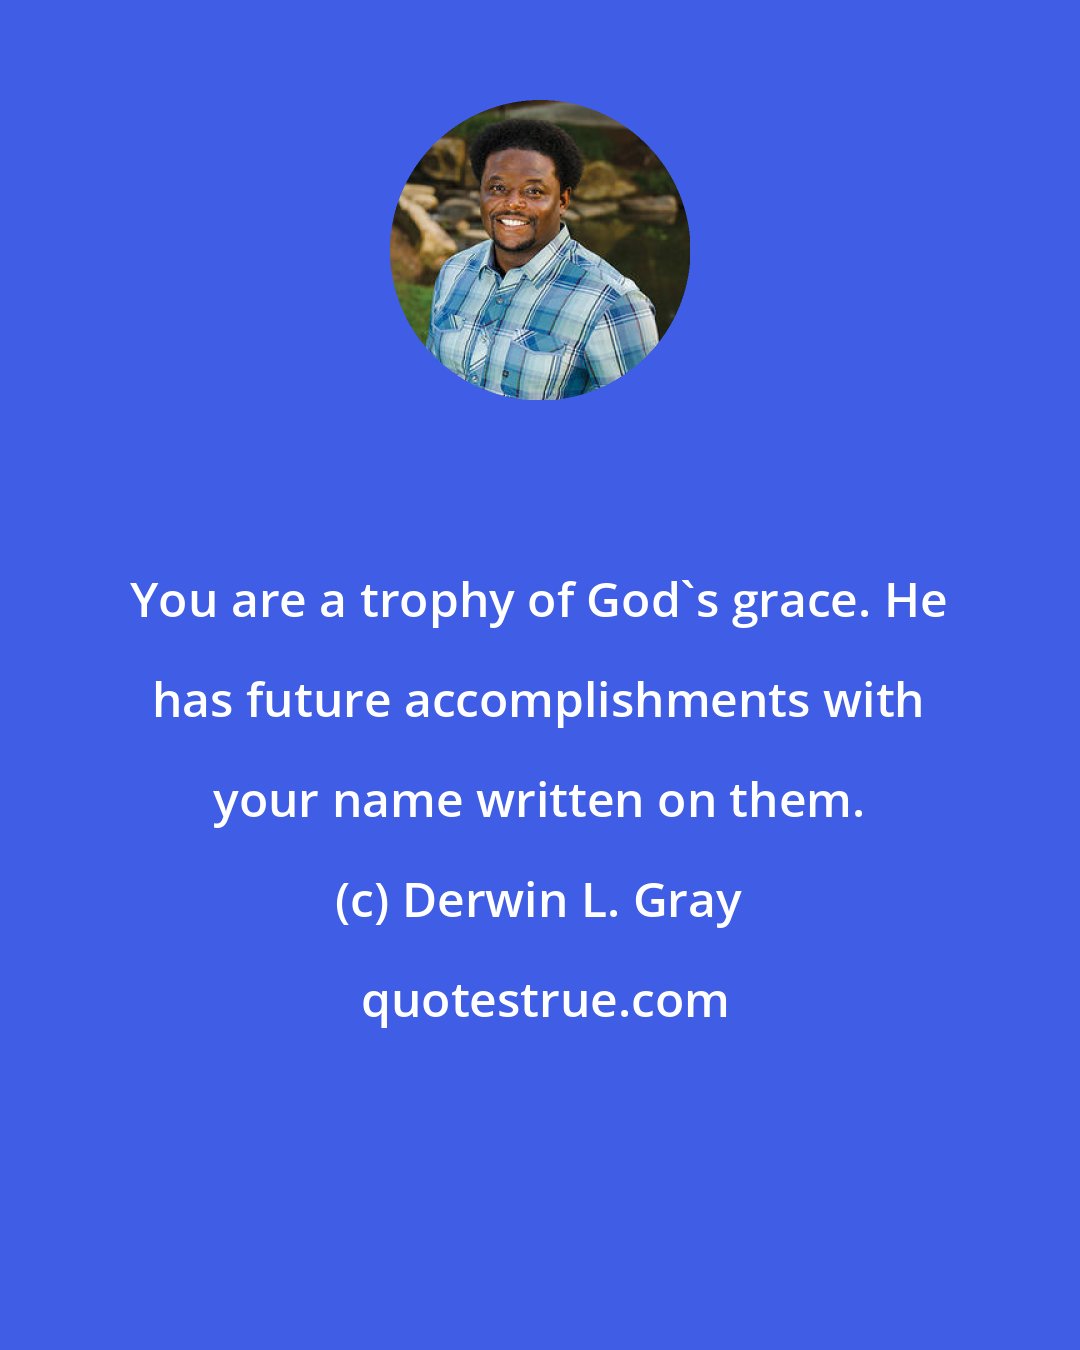 Derwin L. Gray: You are a trophy of God's grace. He has future accomplishments with your name written on them.